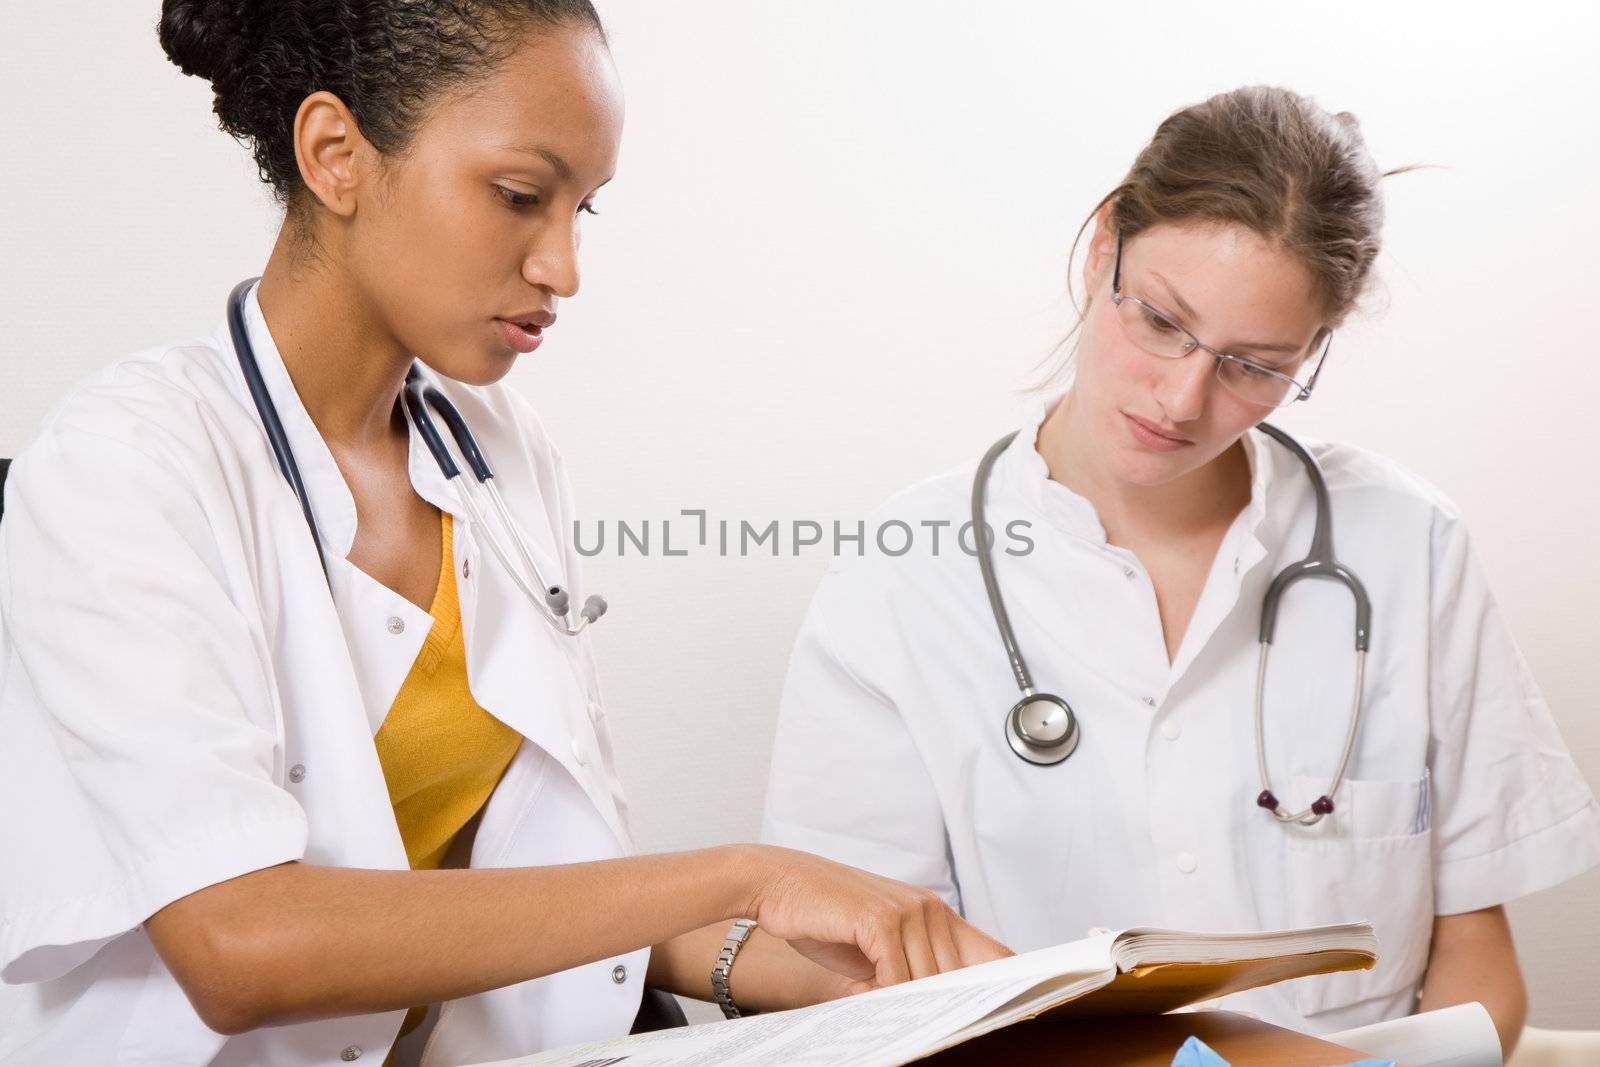 Two medical students looking through the books together